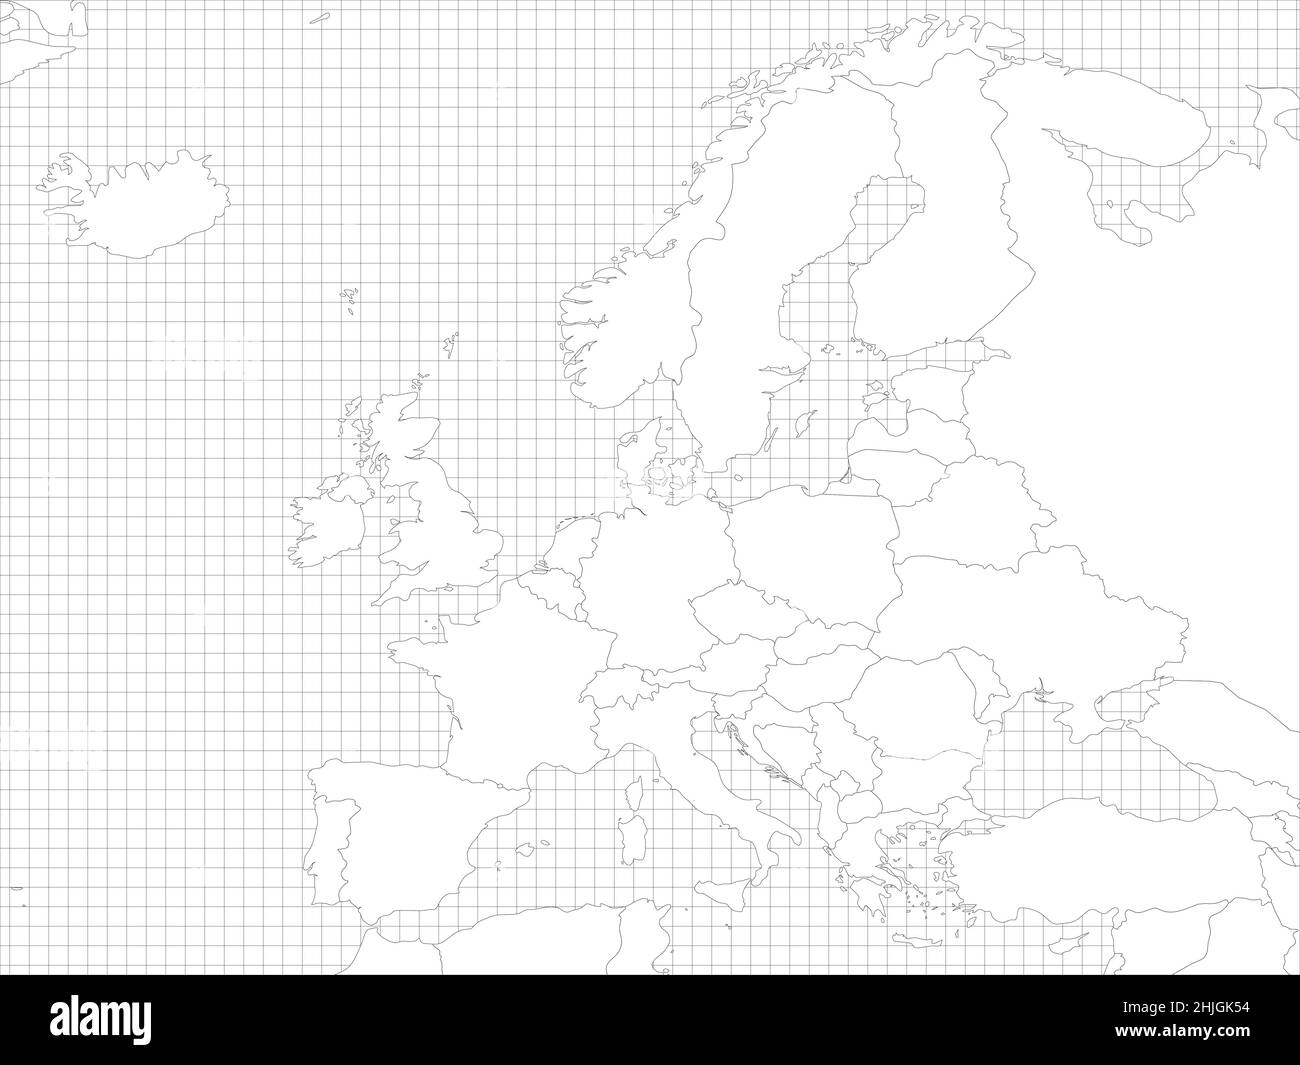 Europe simple outline blank map Stock Vector